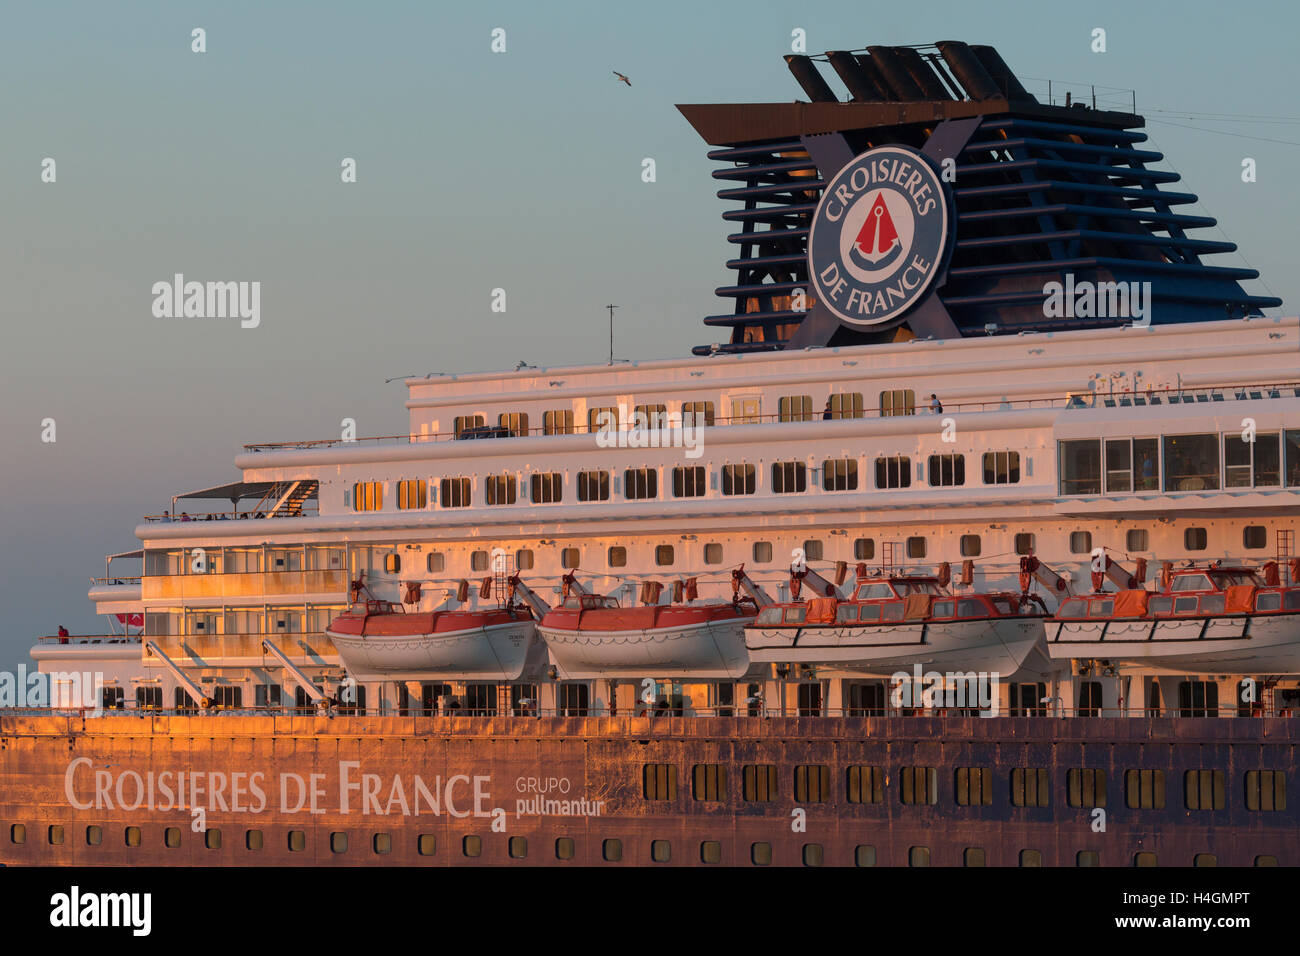 Cruise ship from Croisieres de France Stock Photo